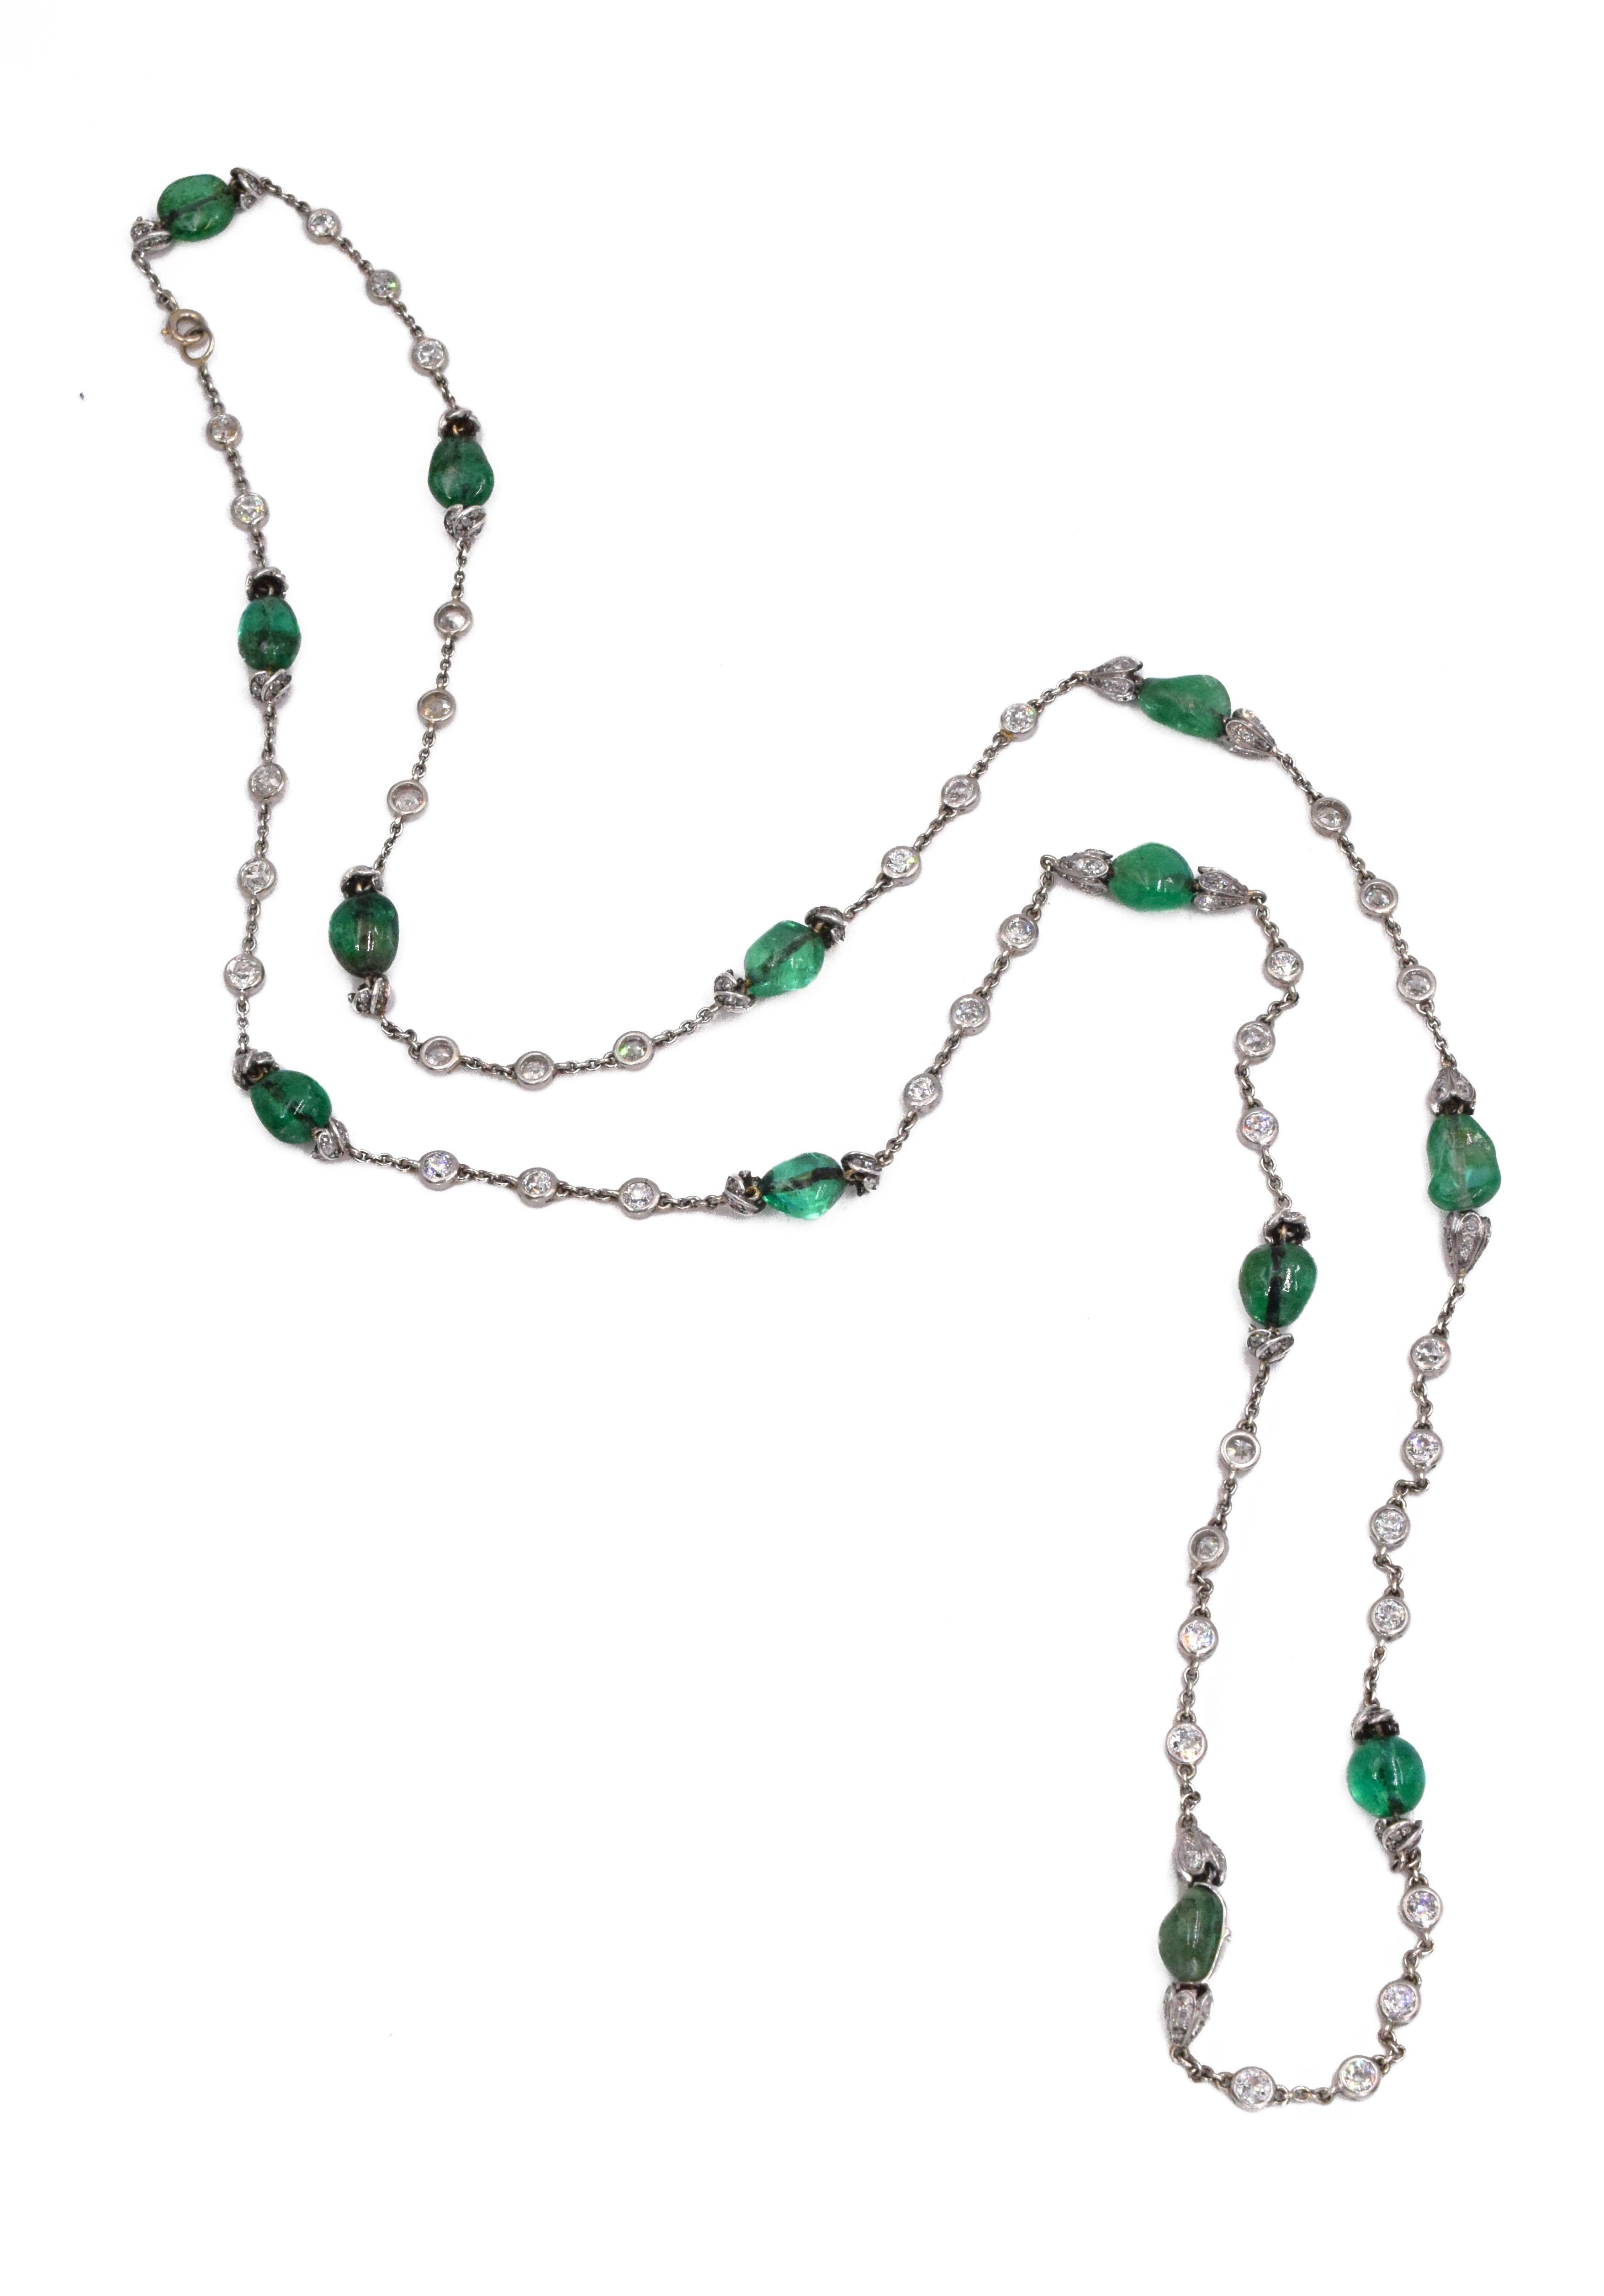 Antique French Emerald Bead and Diamond Longchain Necklace. This necklace has tumbled emerald beads, old, single and rose-cut diamonds, all set in 18k white gold and platinum. French Hallmarks Length: 37 1⁄4 ins., circa 1915. 